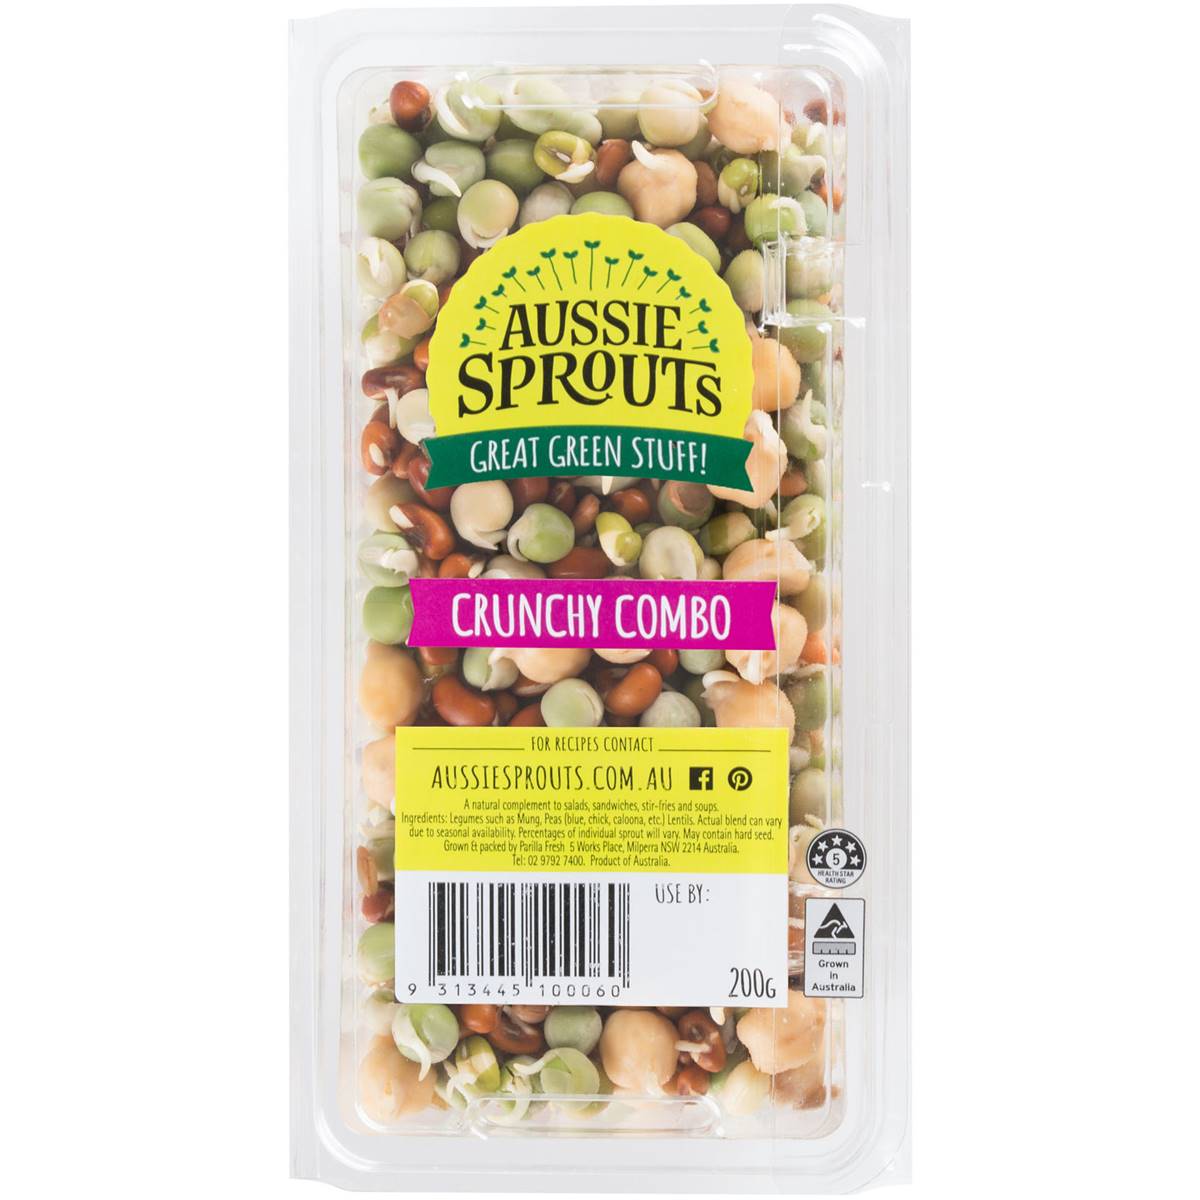 Calories in Aussie Sprouts Sprouts Crunch Combo